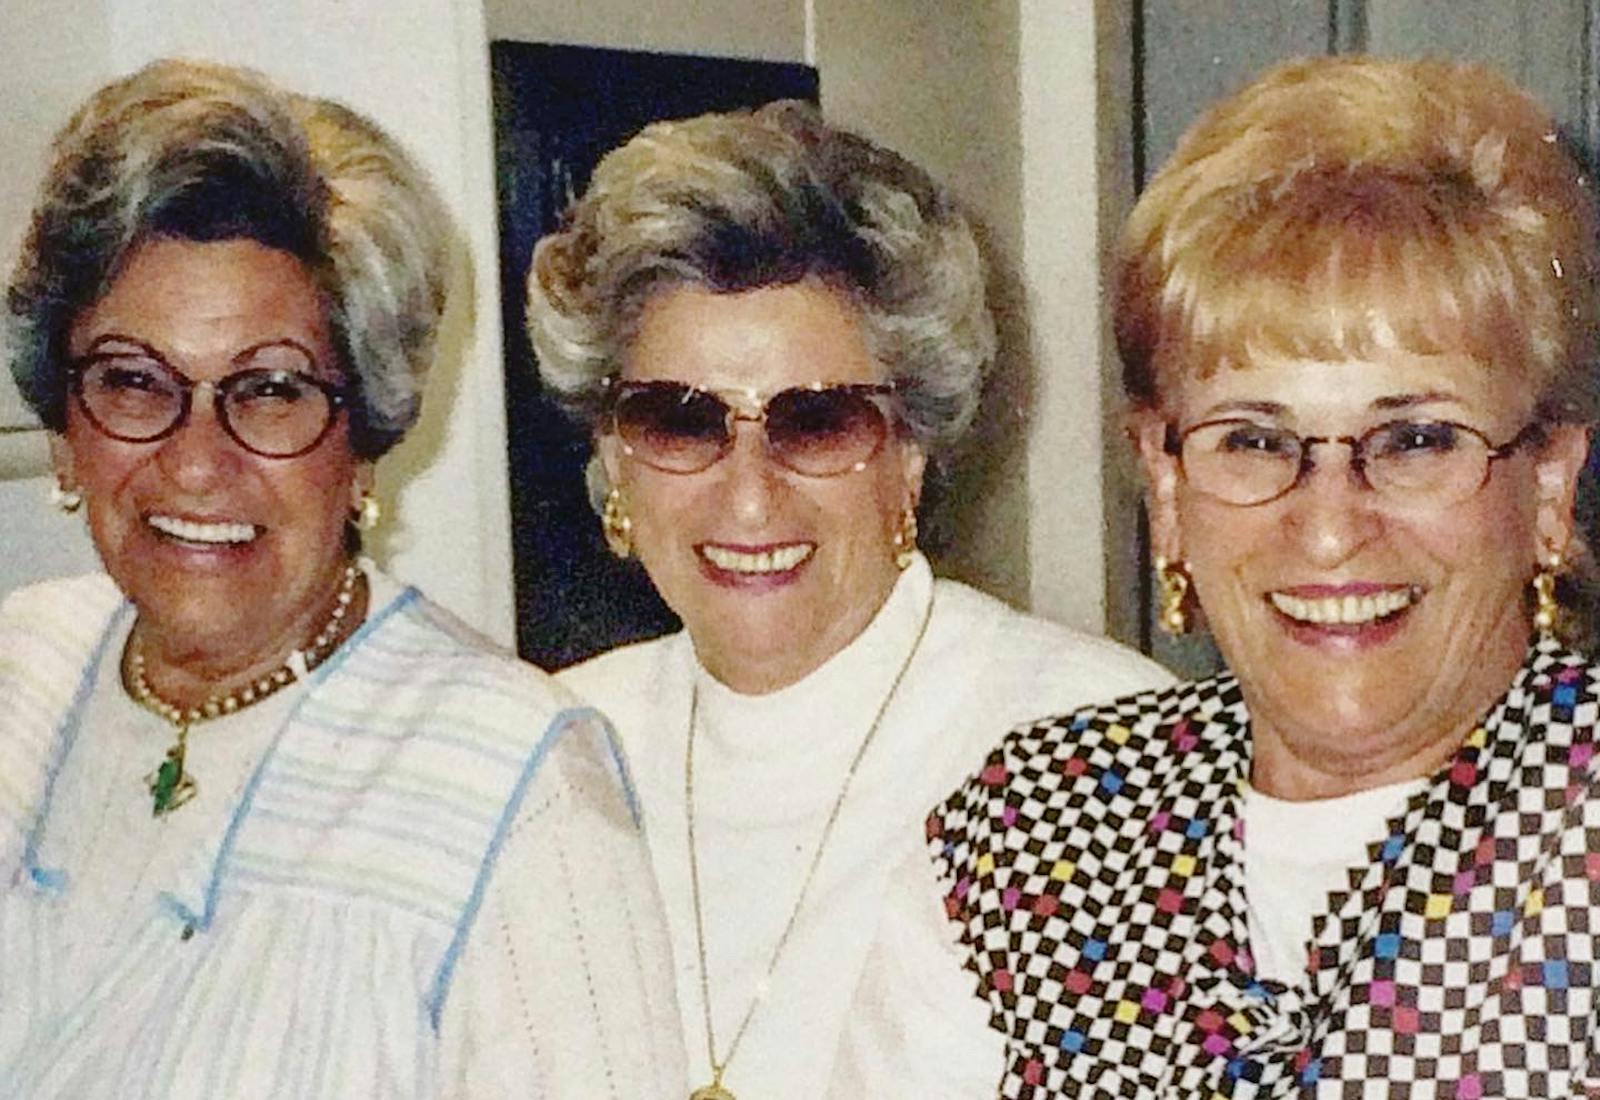 Becca's grandmother Mala (right) in the 90s, laughing with her two sisters. 